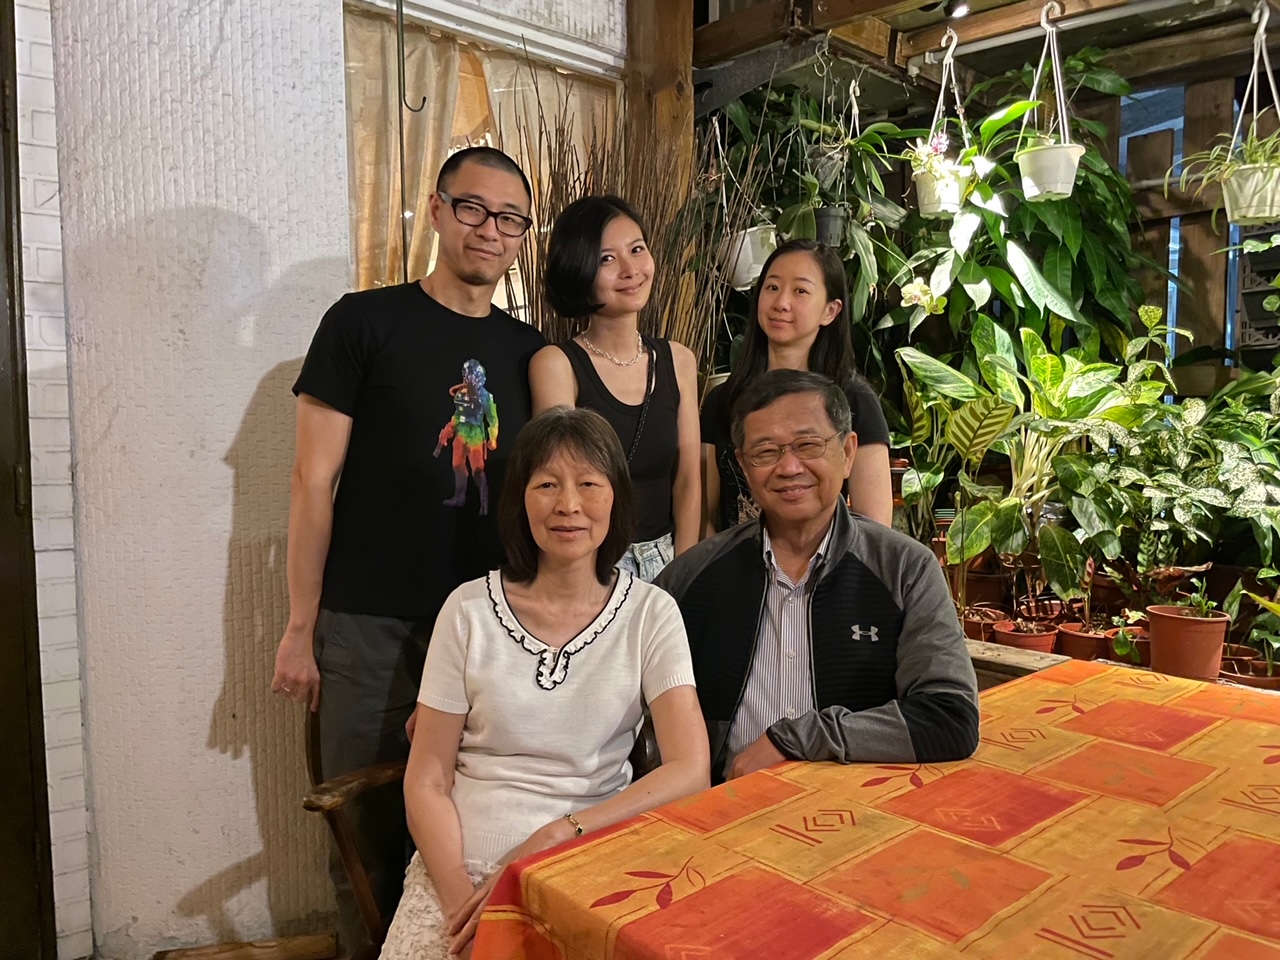 Cheung Chen Kao with his wife, daughter and son